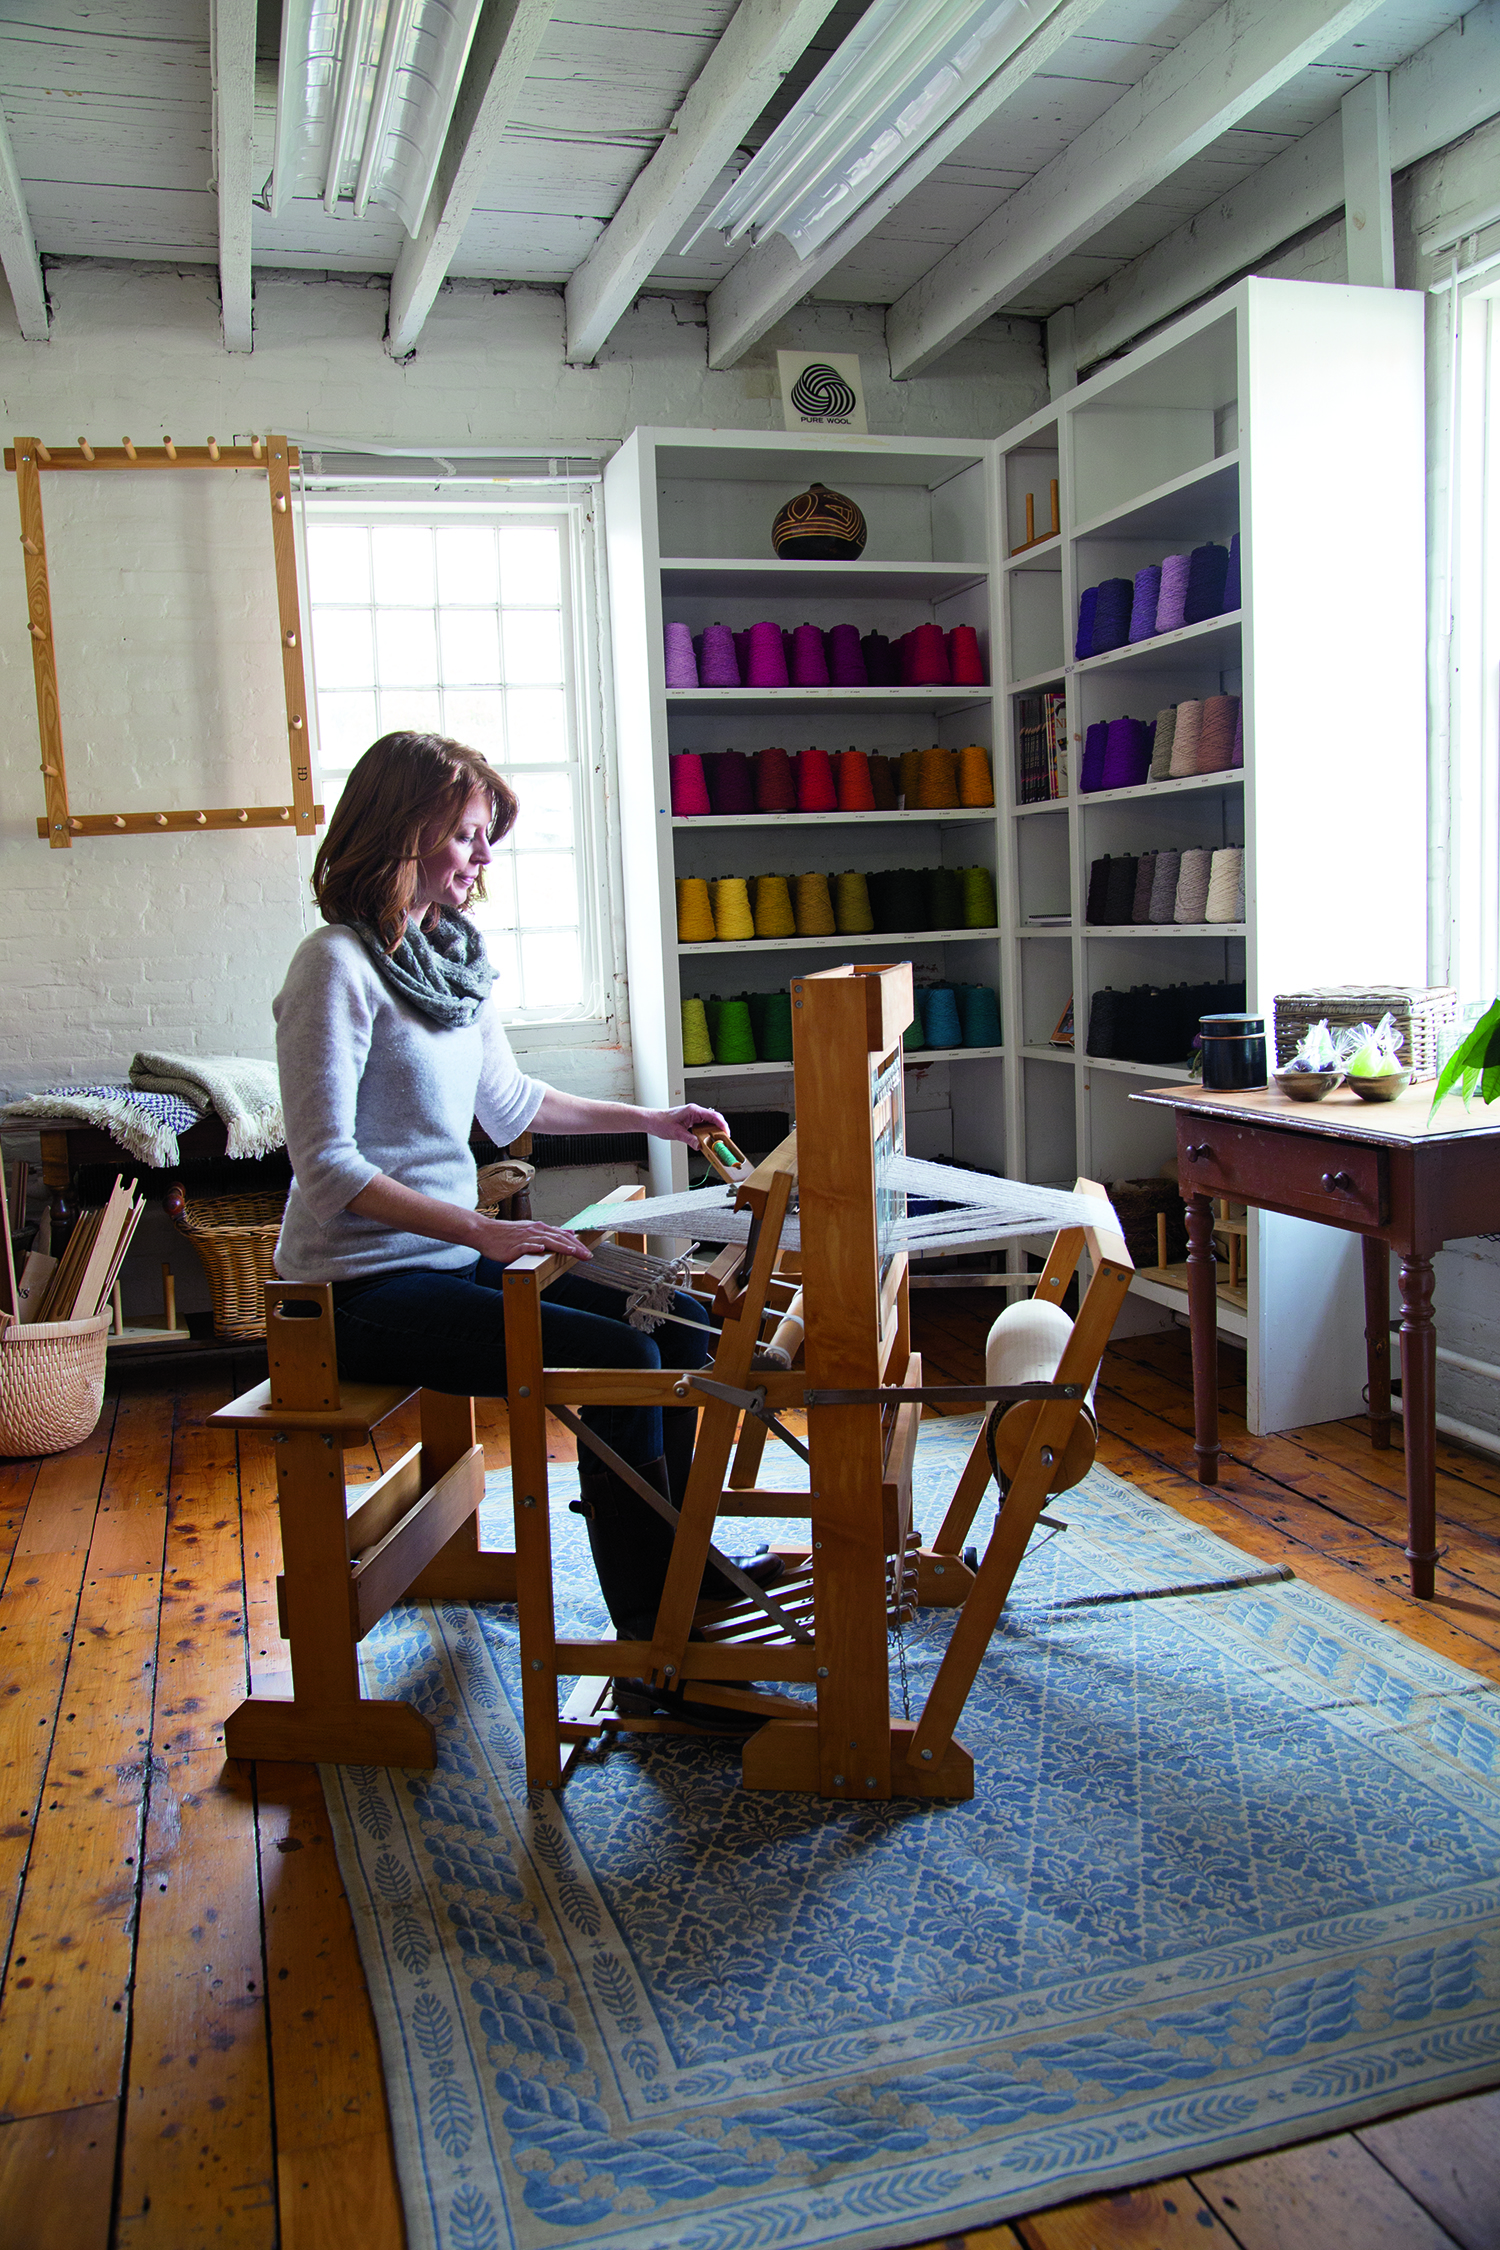 Sara Parker Strube works at a loom at Harrisville Designs, a restored mill complex in a historic New Hampshire village, offering classes and workshops in the textile arts, including weaving, knitting, and spinning.